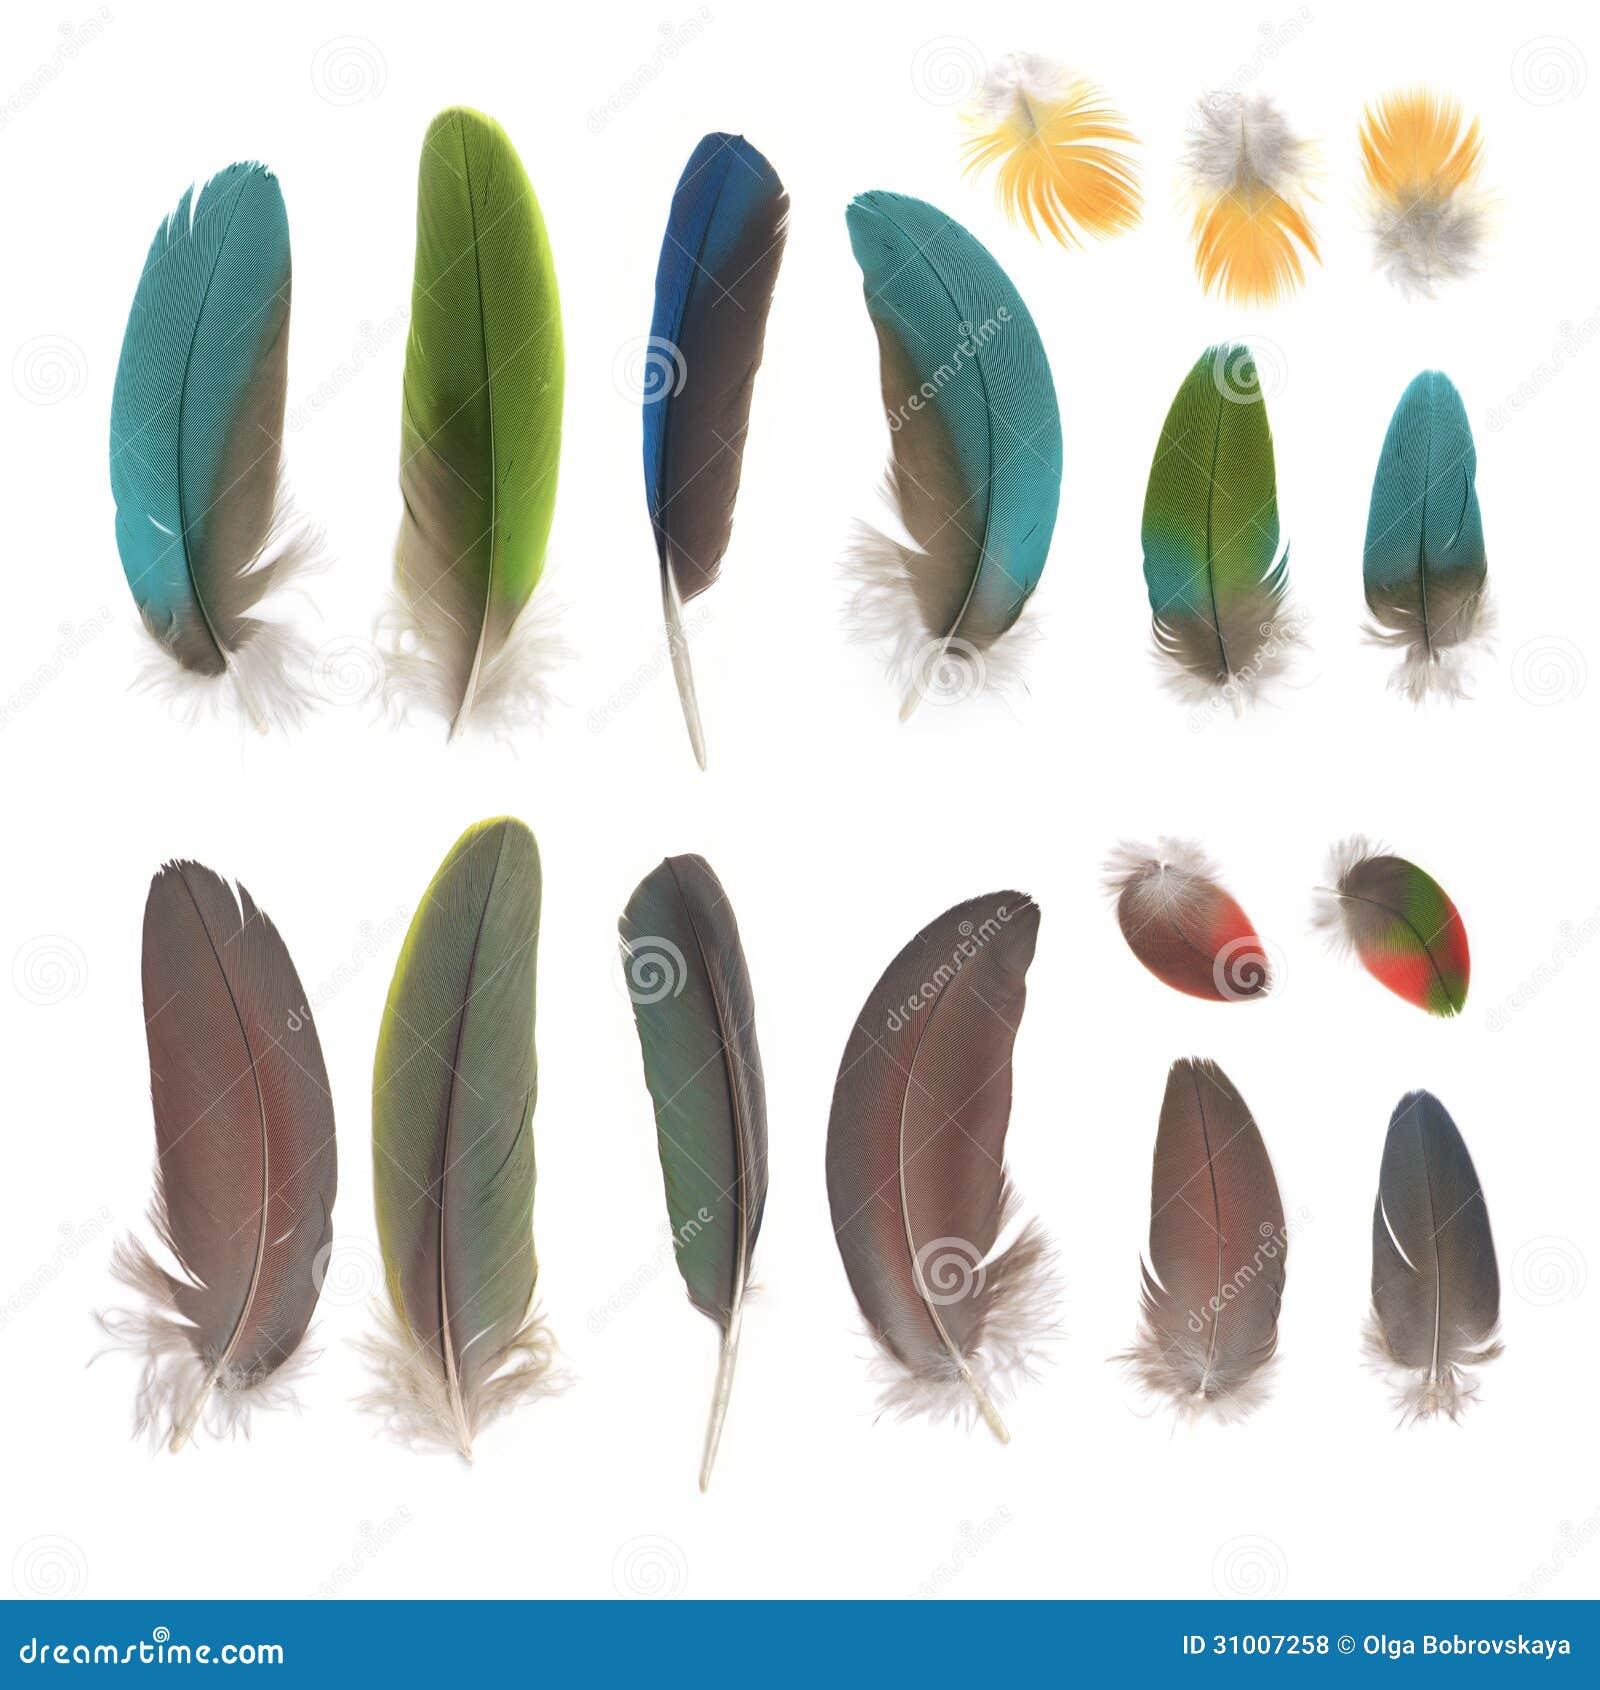 parrot feathers